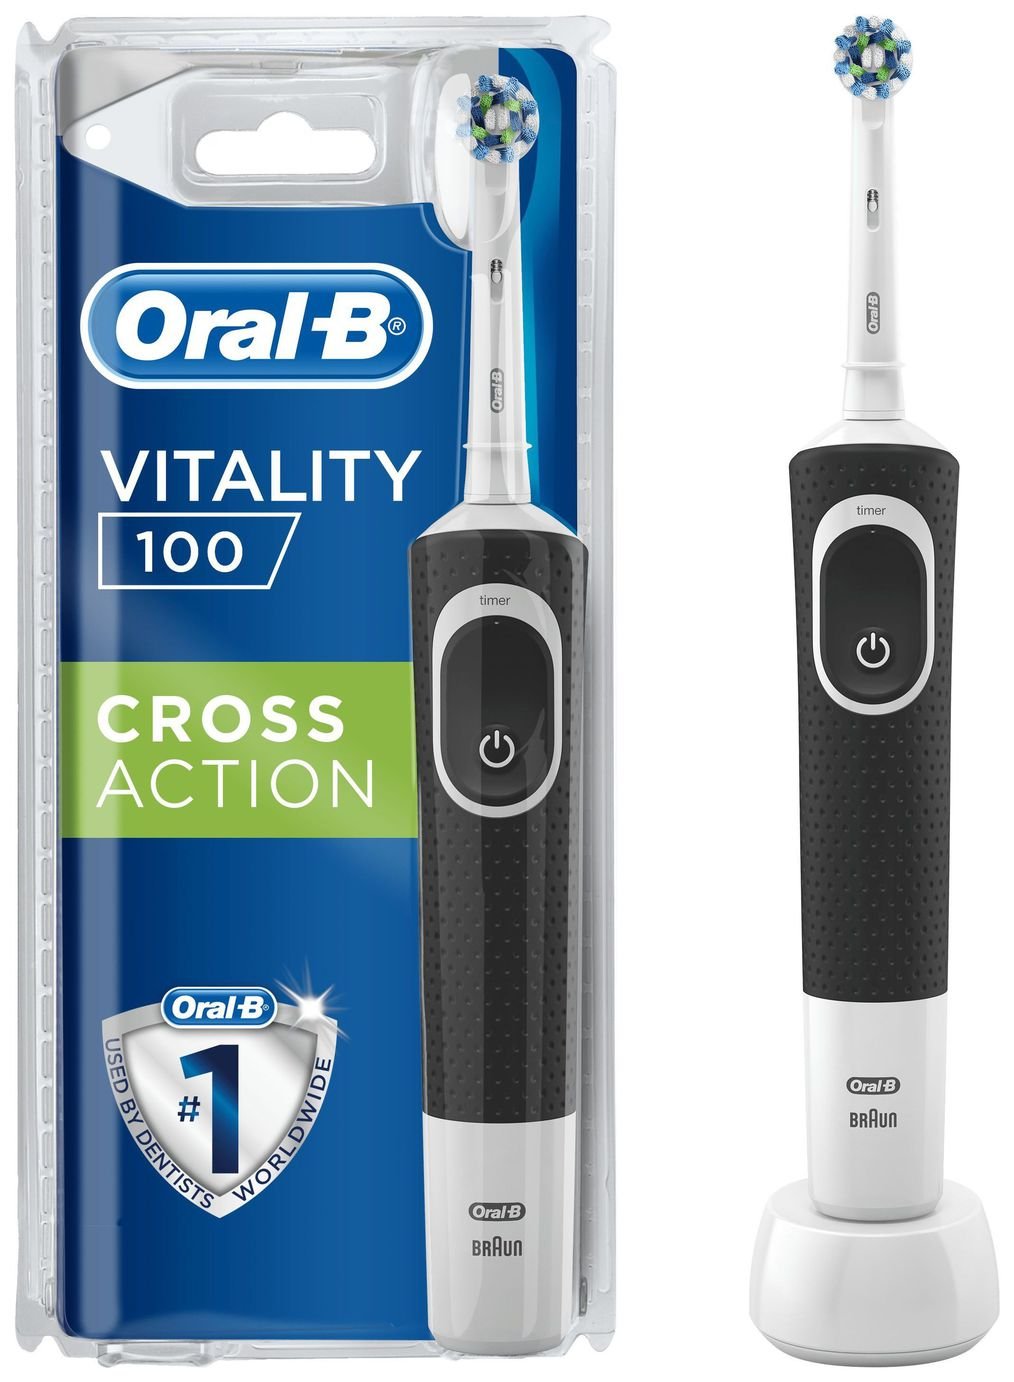 oral-b-vitality-precision-clean-electric-toothbrush-reviews